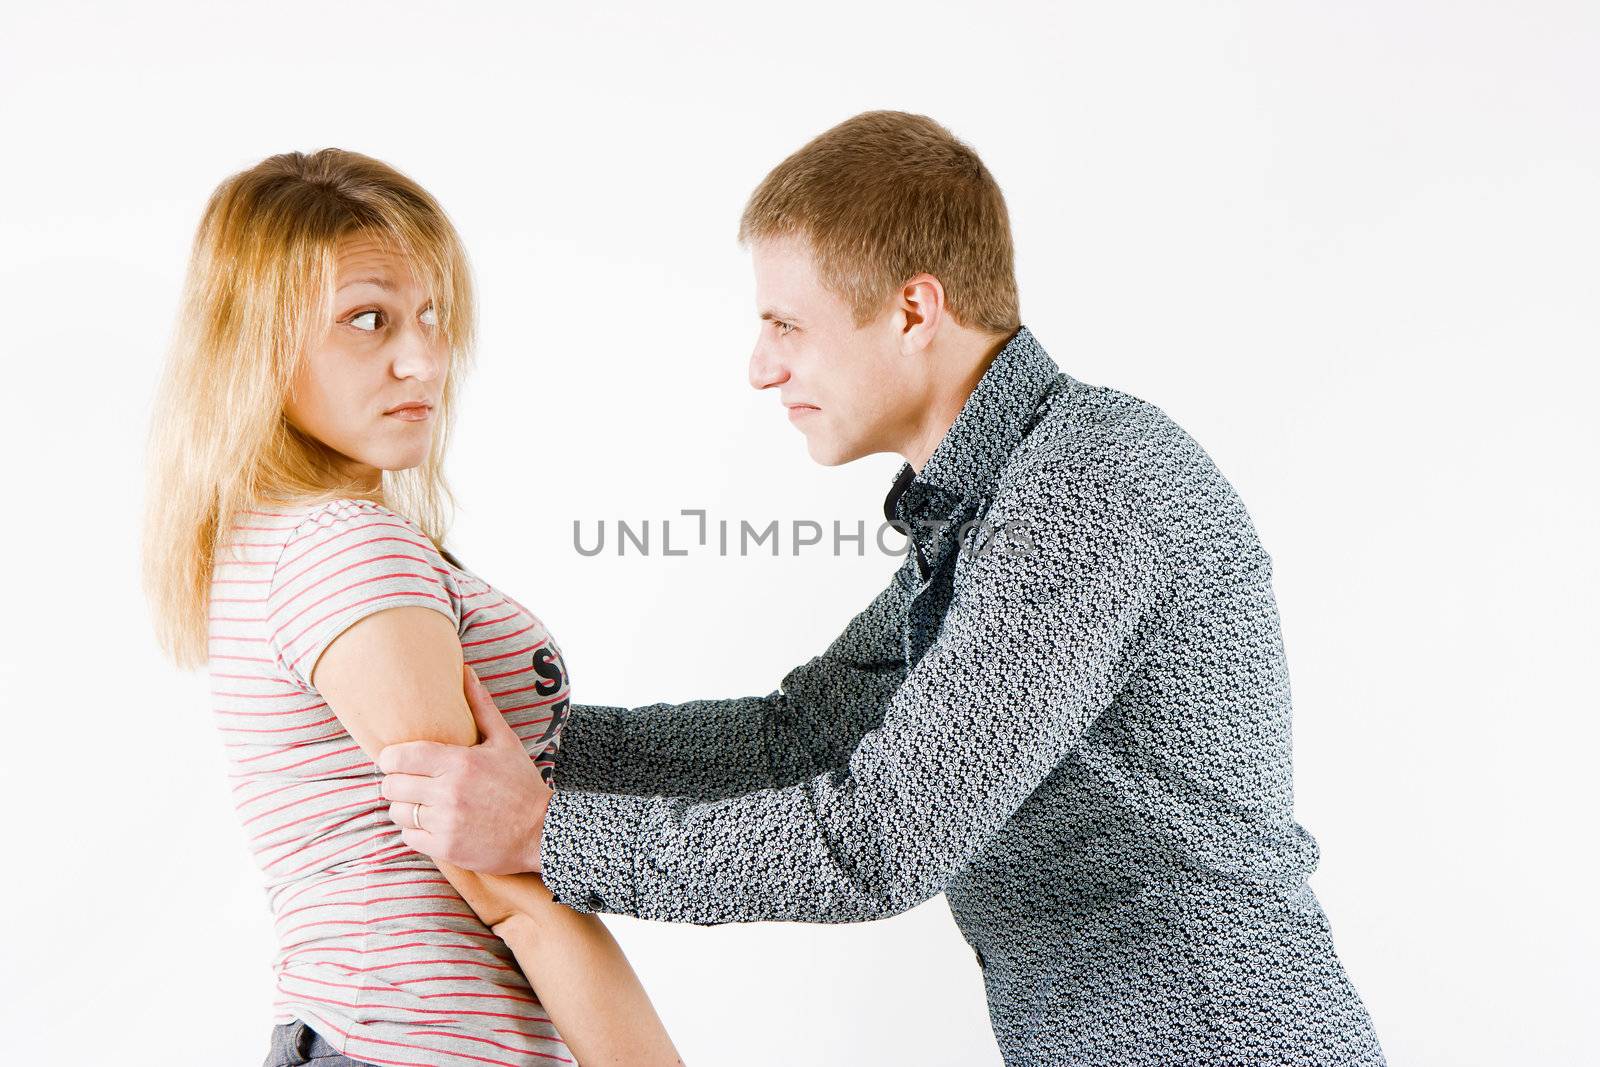 Man attacks woman on a white background
